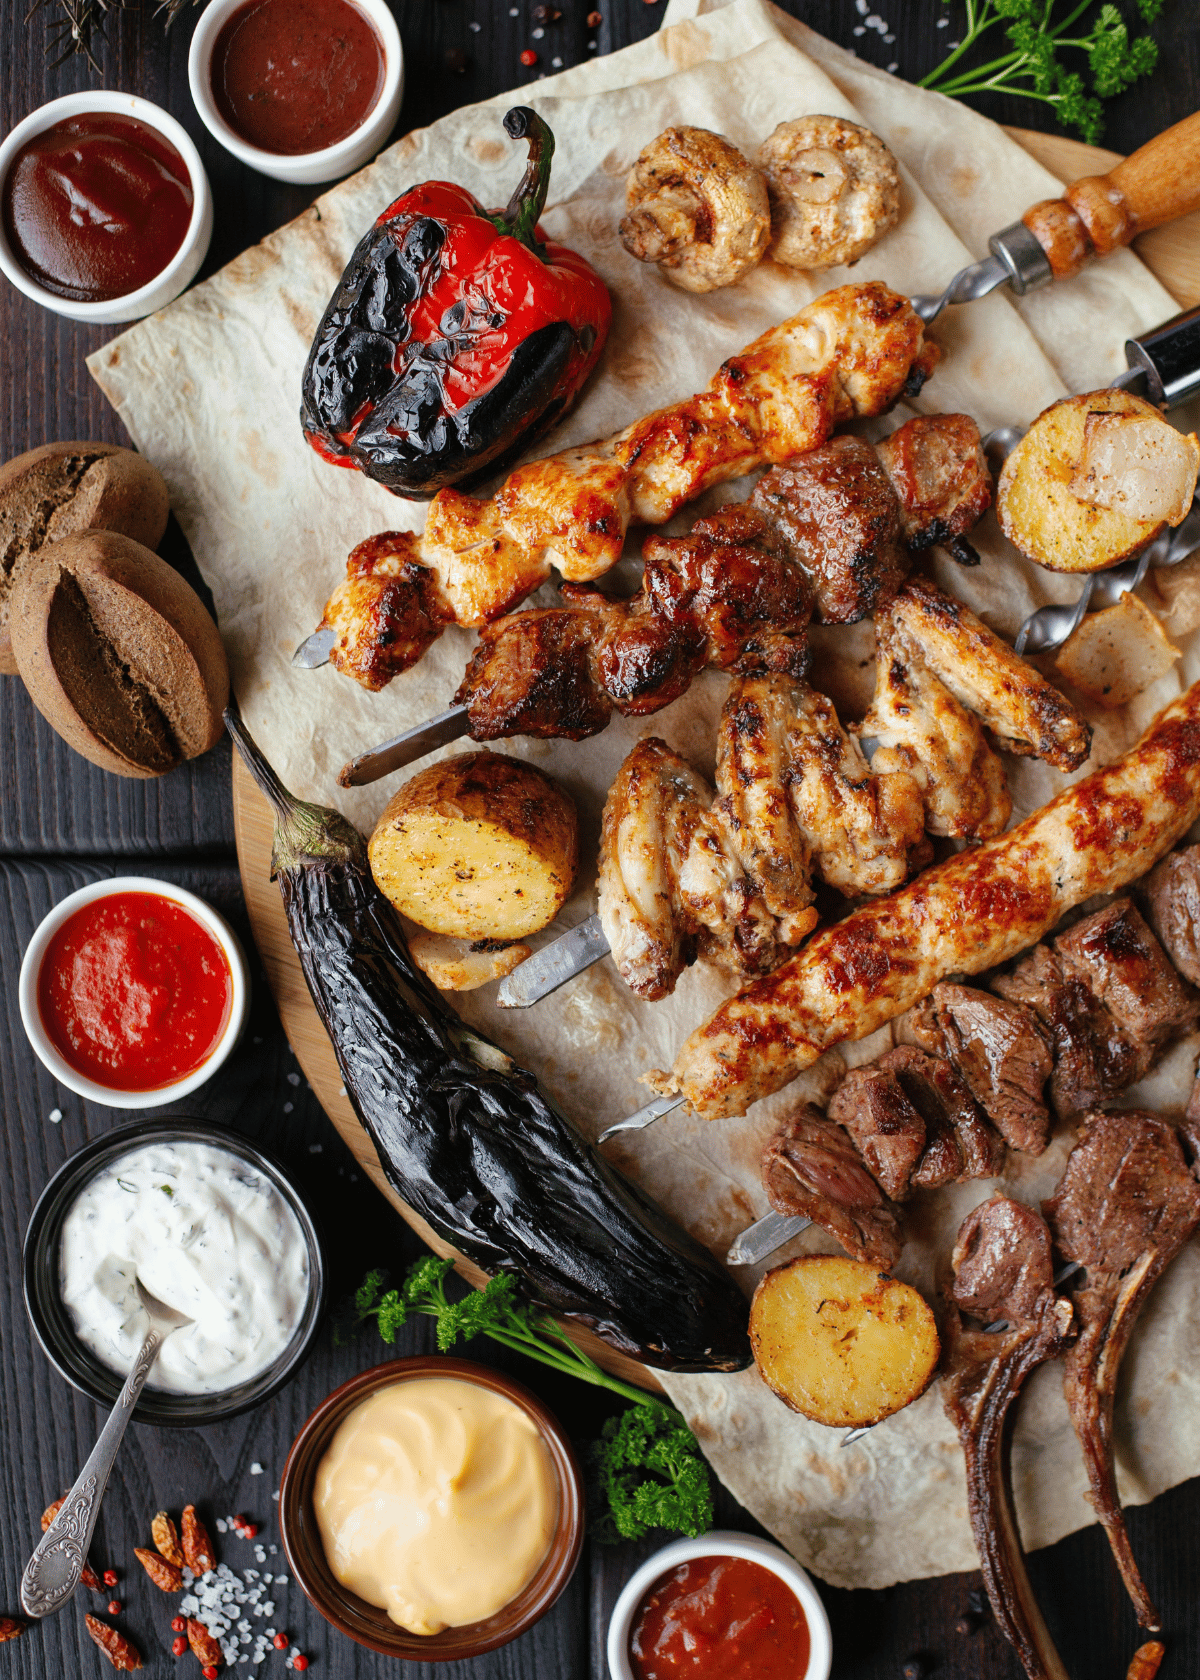 Get Ready For Summer Grilling: The Top Rated Outdoor Barbeque Islands